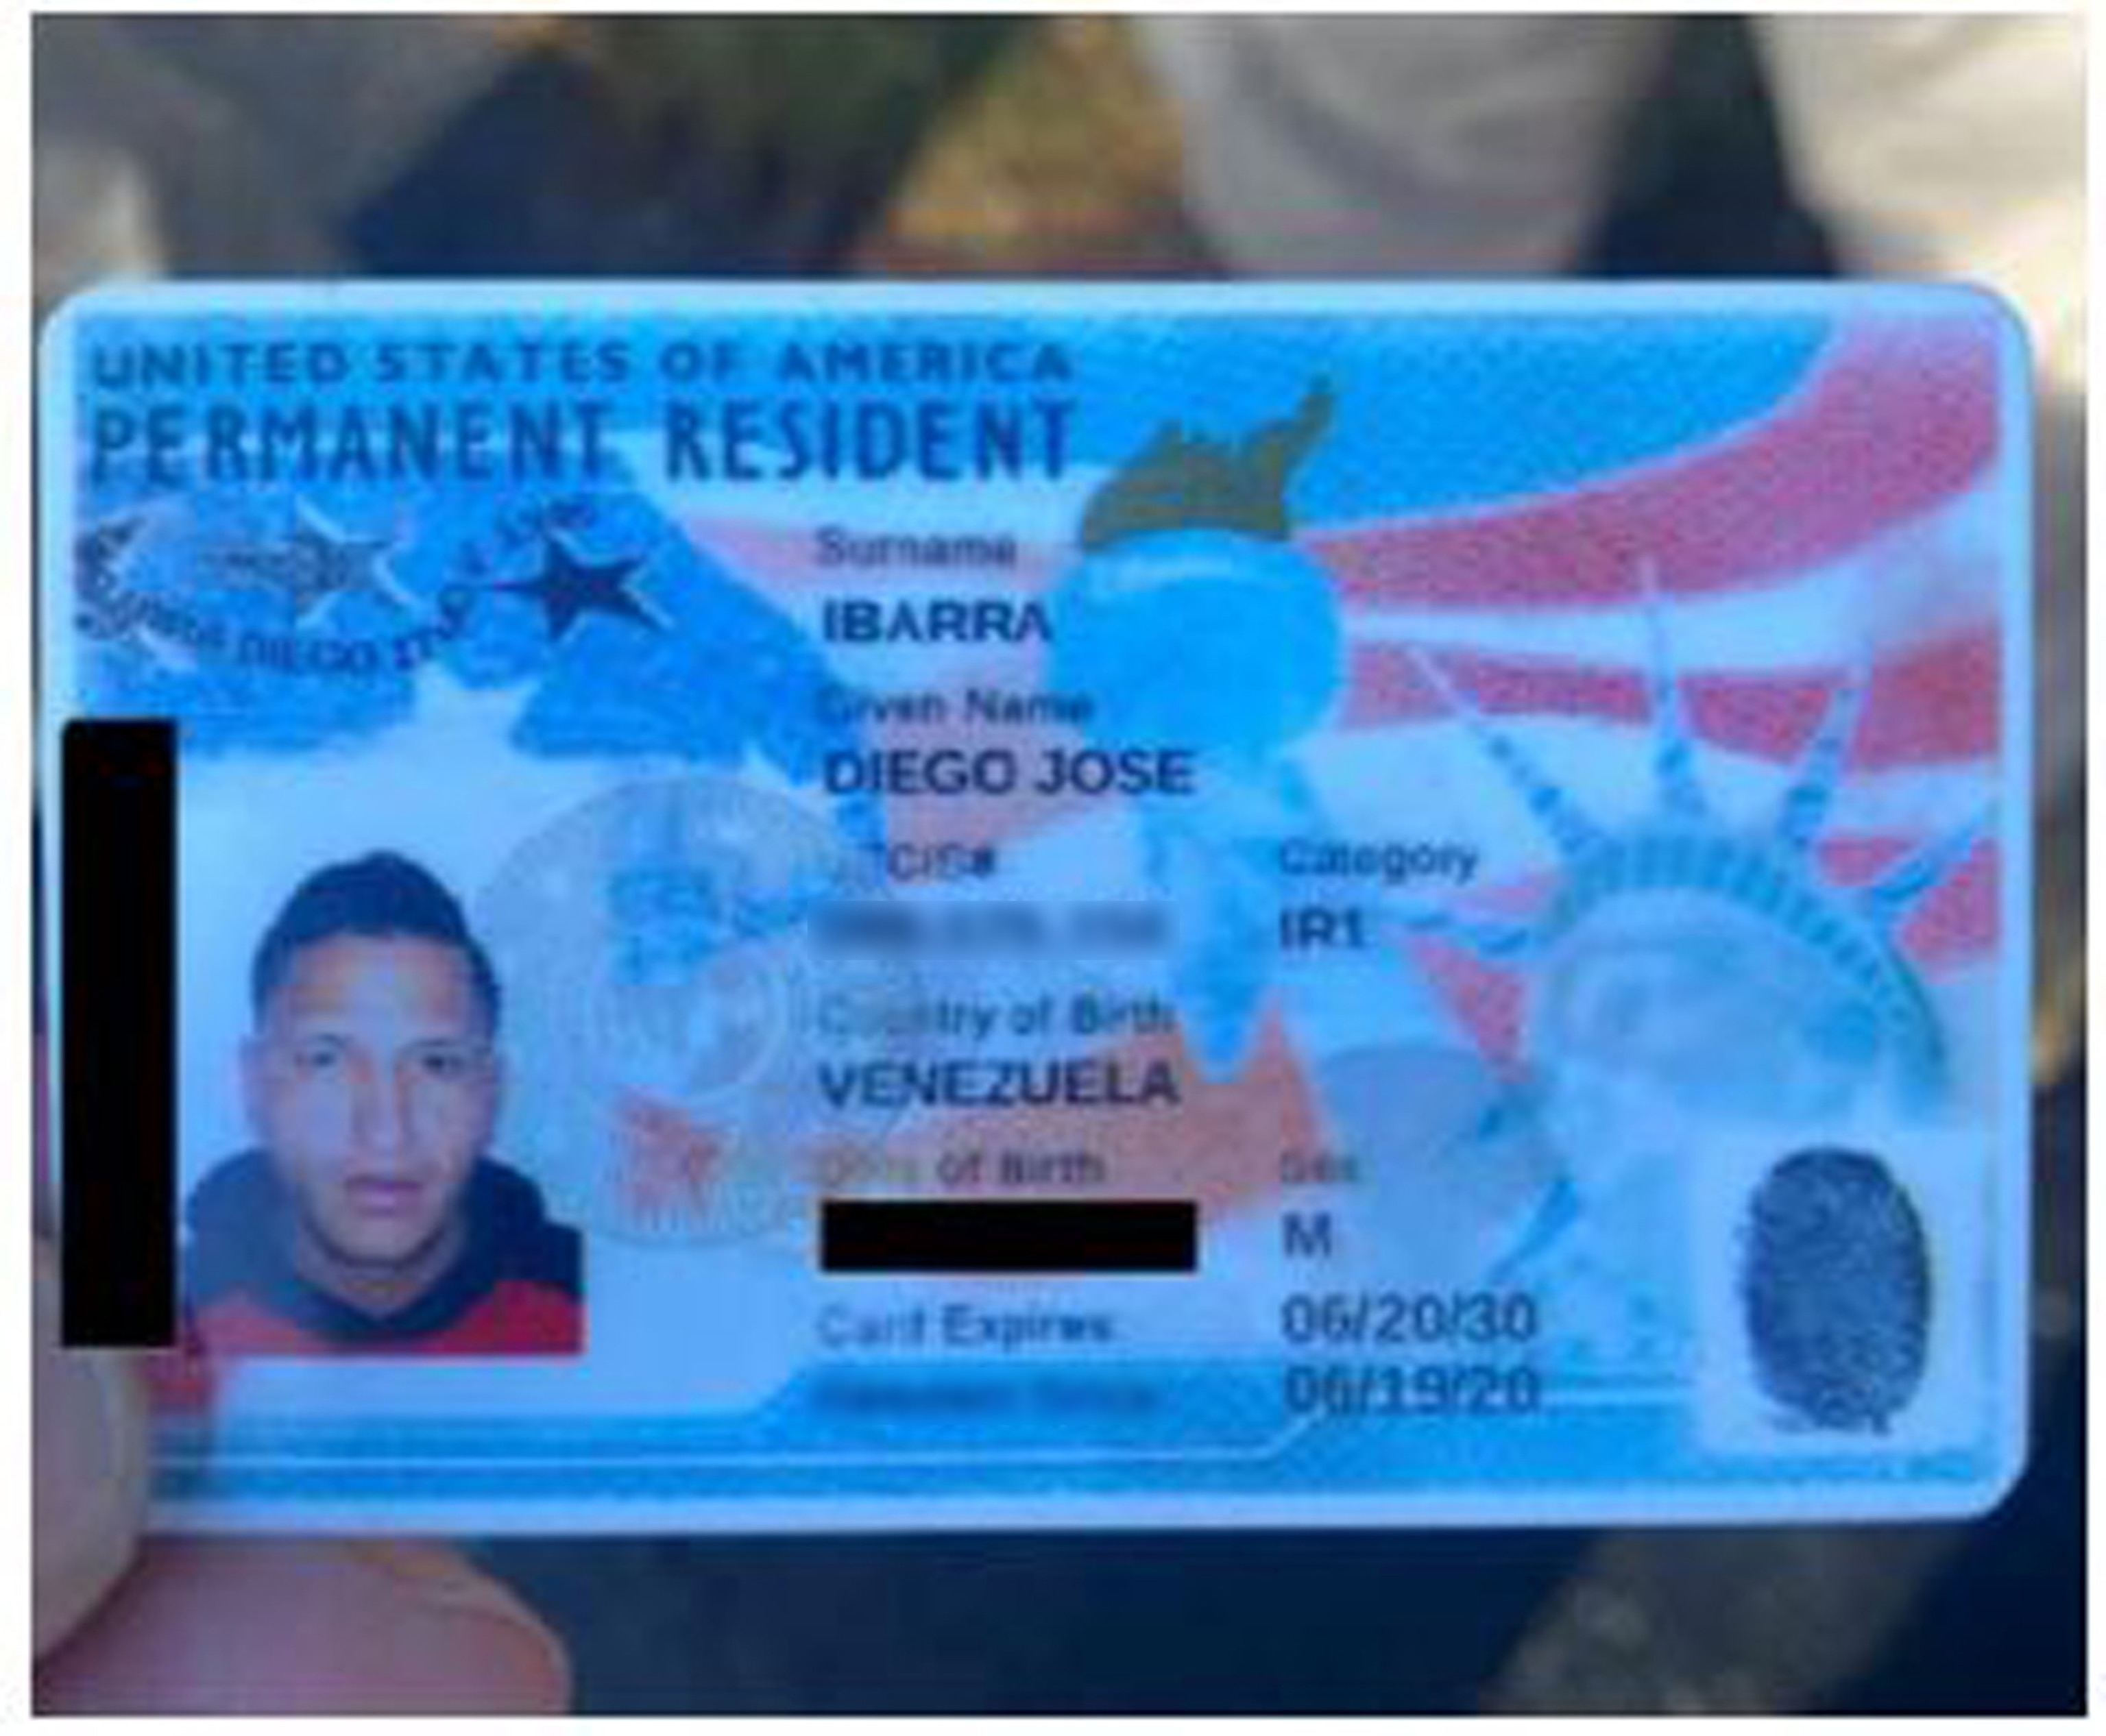 PHOTO: This image included in the Motion For Detention filed by the Middle District of Georgia shows the suspect's ID, which was turned over to Homeland Security Investigations (“HSI”) agents on scene in Athens, Ga., who verified that it was counterfeit.